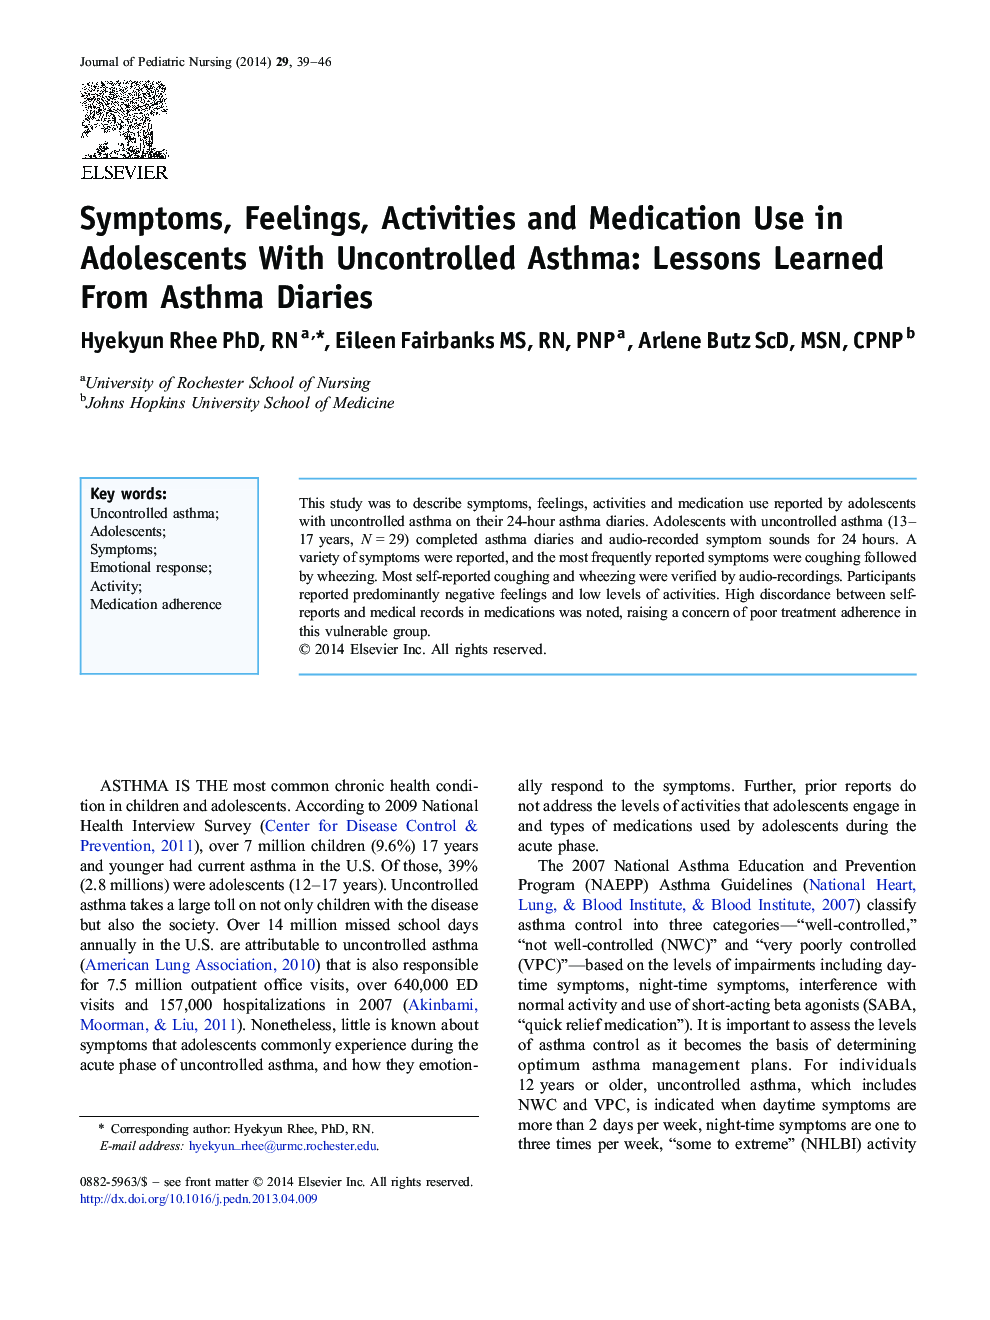 Symptoms, Feelings, Activities and Medication Use in Adolescents With Uncontrolled Asthma: Lessons Learned From Asthma Diaries